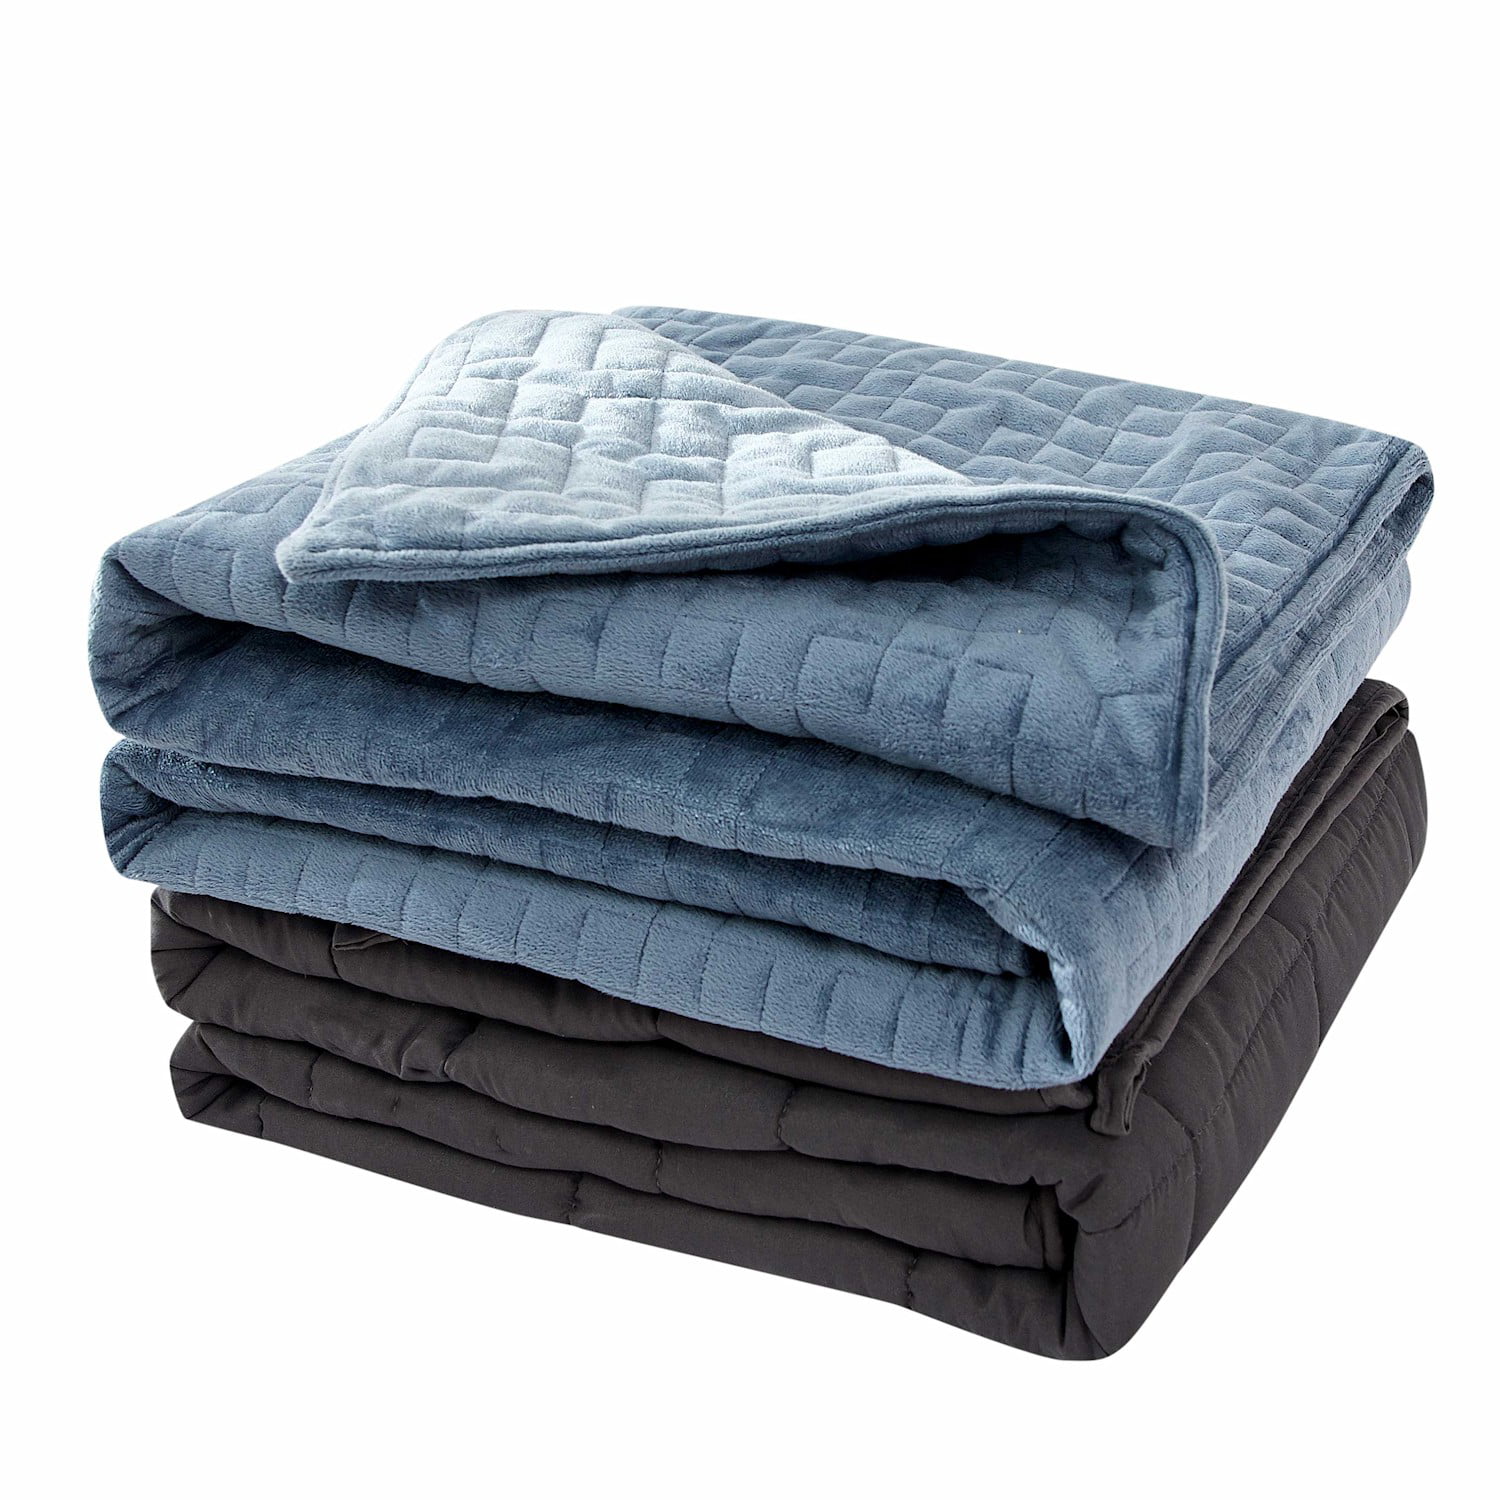 Sutton Home Fashions Weighted Blanket - 15 Lbs with Blue Velvet Duvet